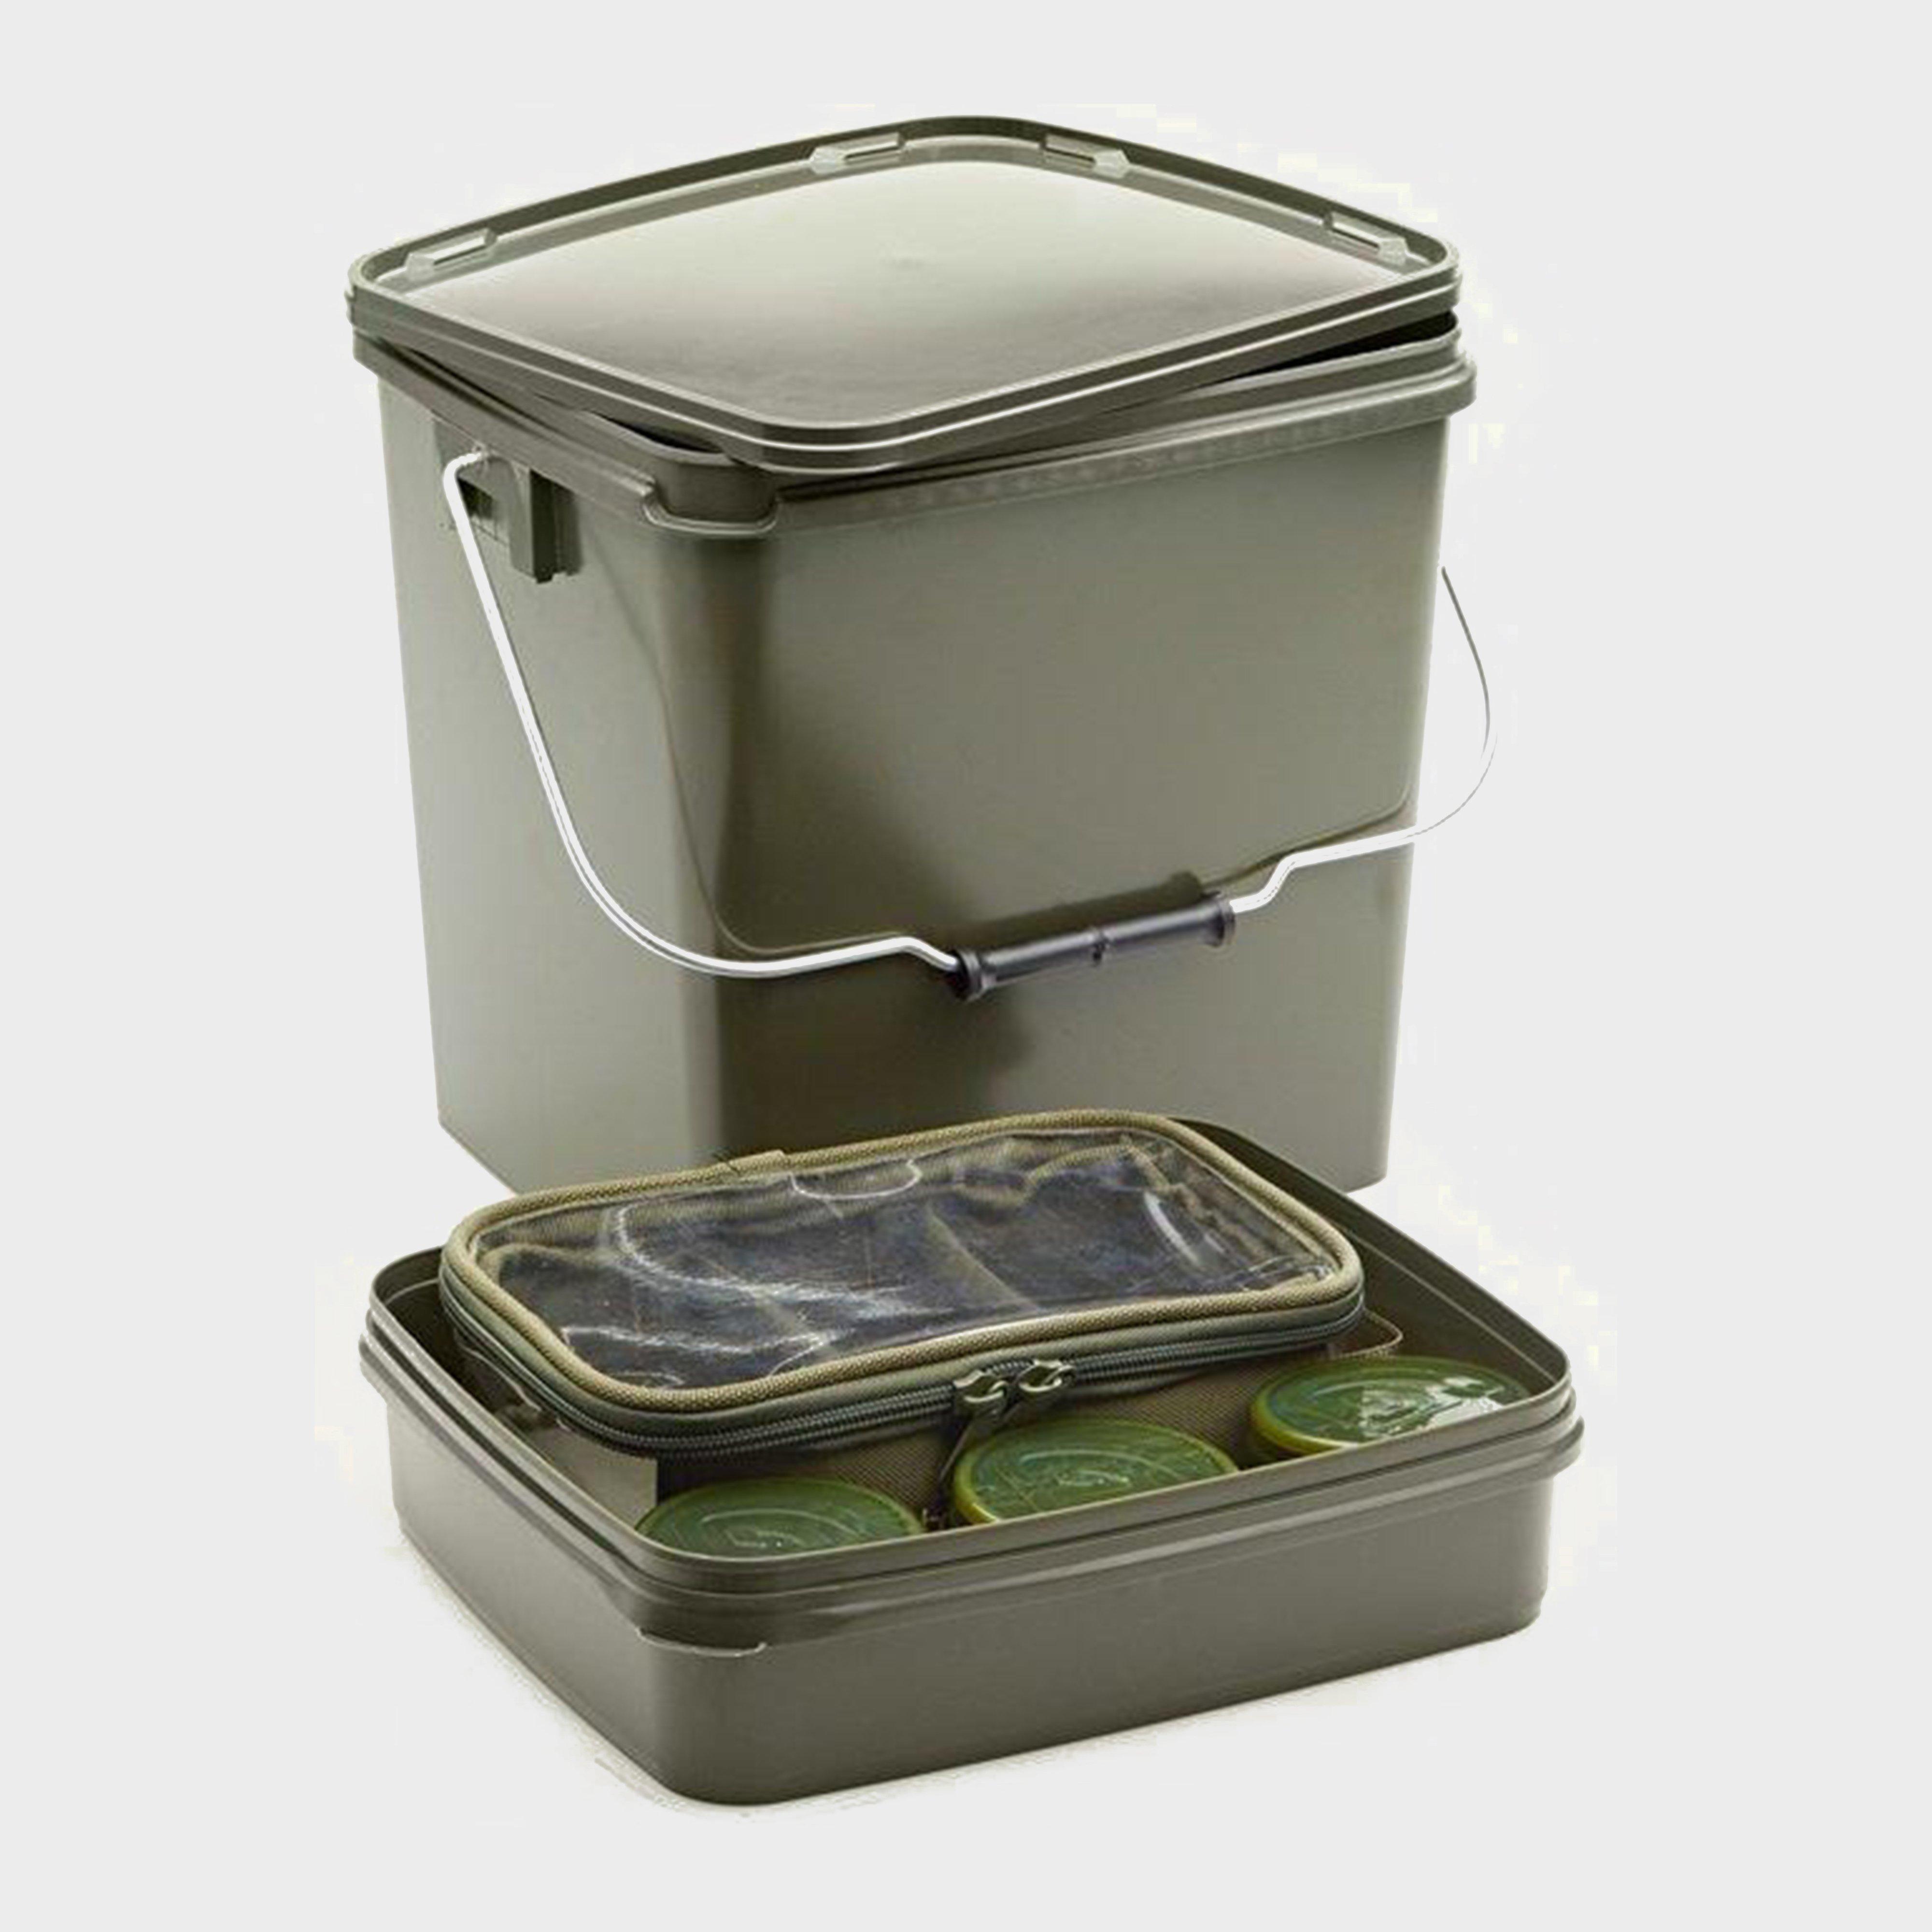 Trakker 13 ltr Olive Square Container Review